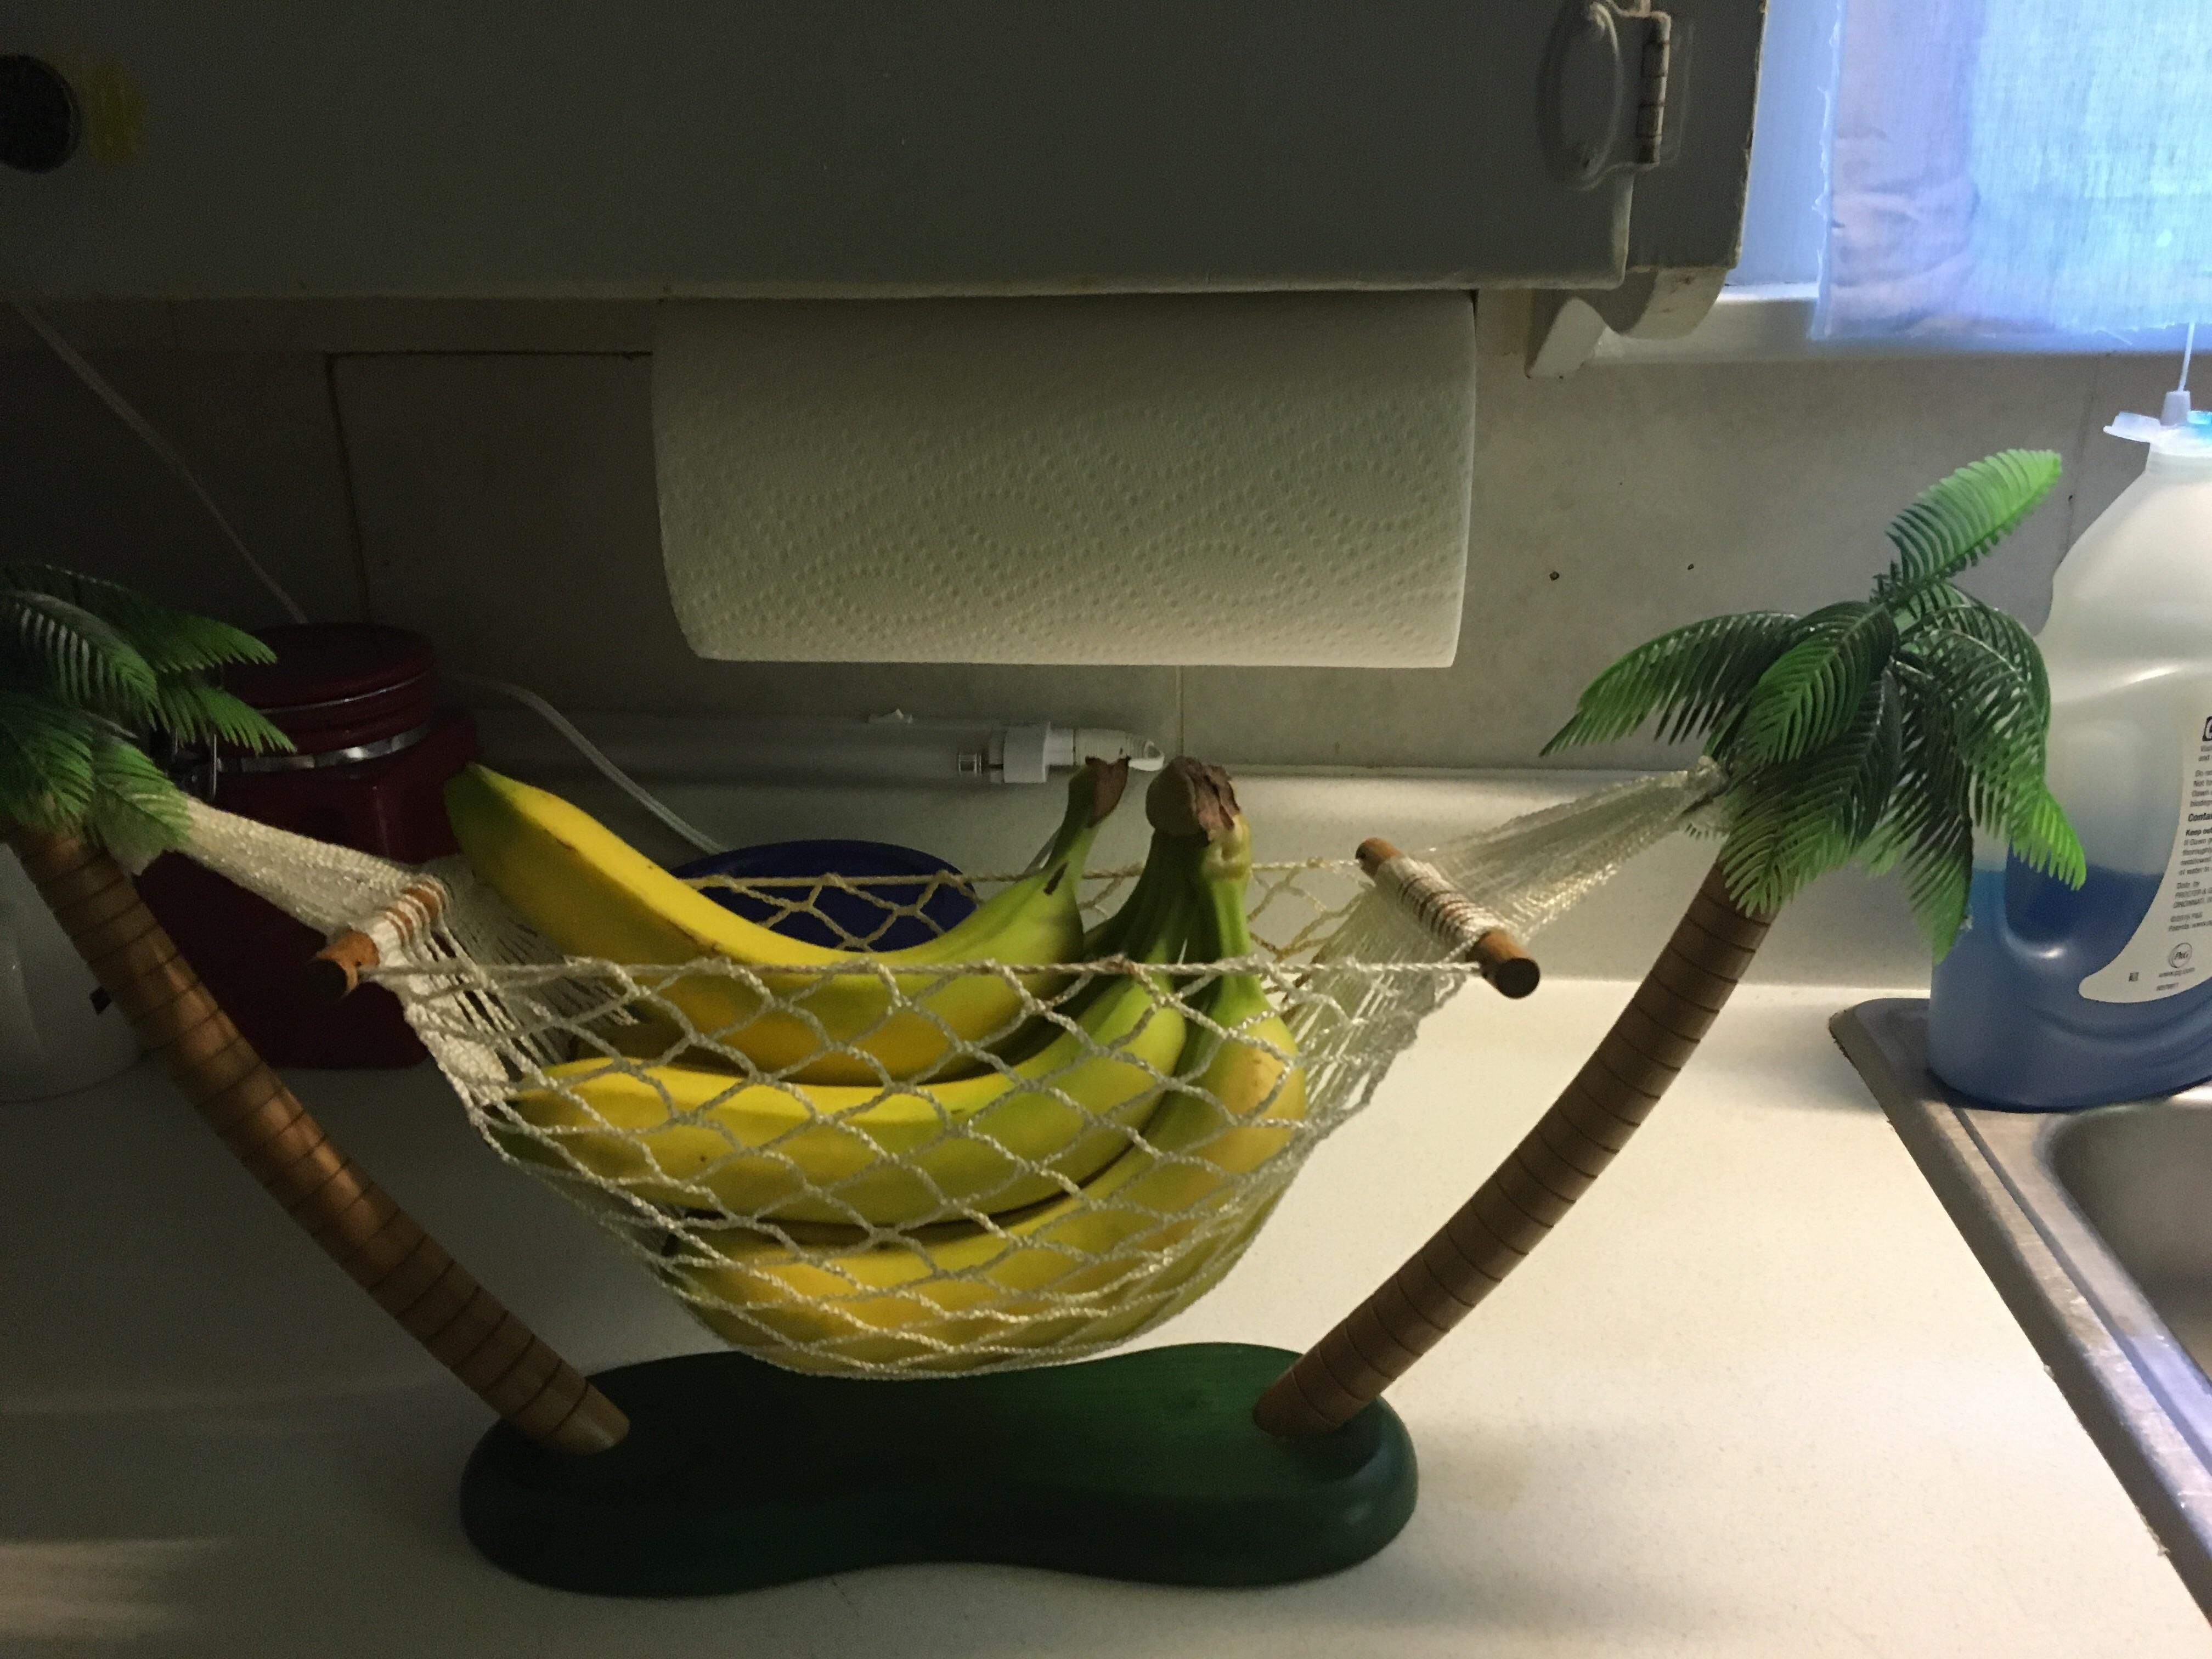 Thought you guys might like to see my new banana hammock.